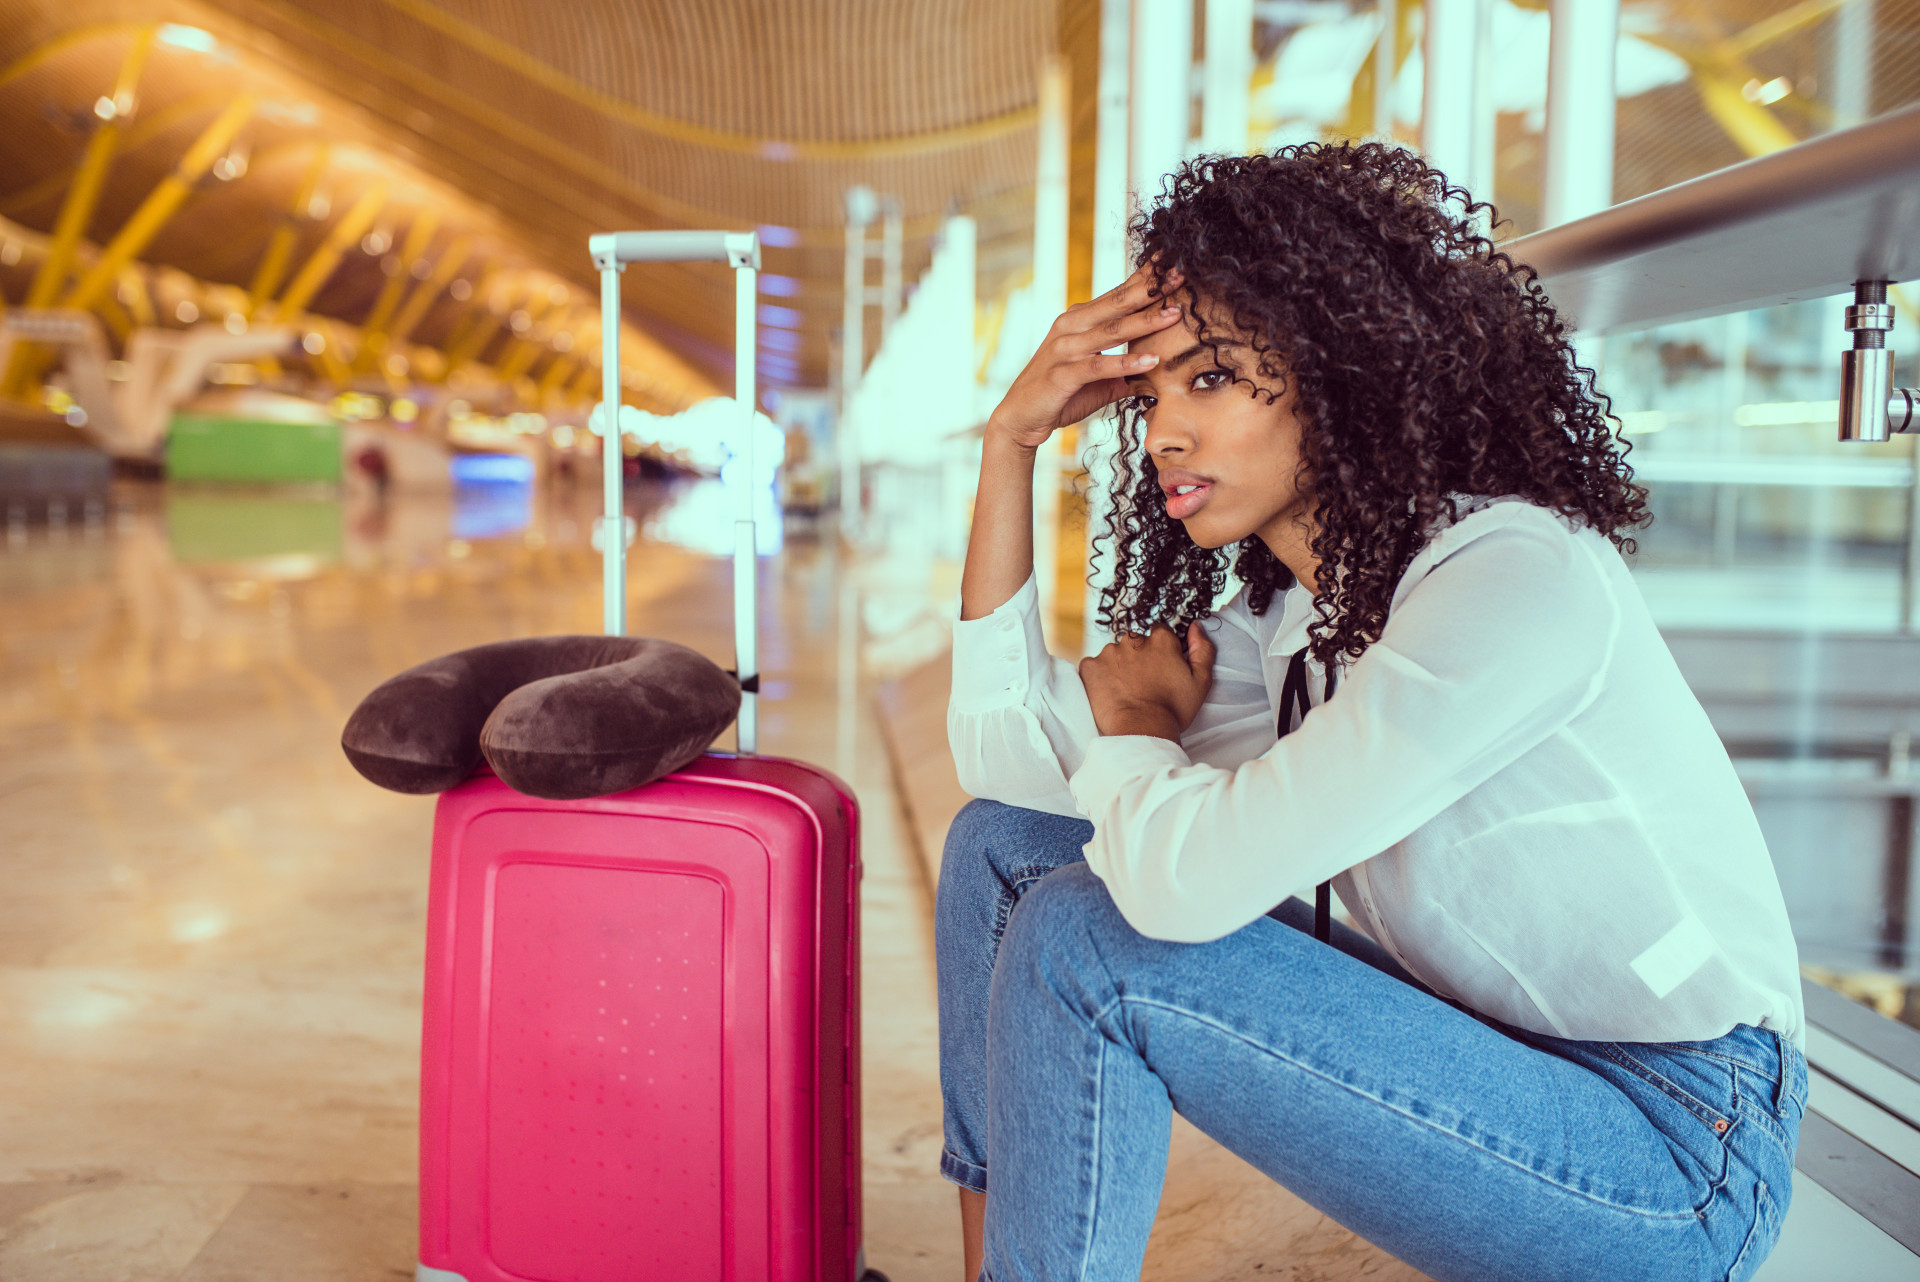 <span><span>If, however, the person suffers from an anxiety disorder, they may not be able to go to the airport and get on the flight, even if it means losing their job.</span></span><p><a href="https://www.msn.com/en-us/community/channel/vid-7xx8mnucu55yw63we9va2gwr7uihbxwc68fxqp25x6tg4ftibpra?cvid=94631541bc0f4f89bfd59158d696ad7e">Follow us and access great exclusive content every day</a></p>